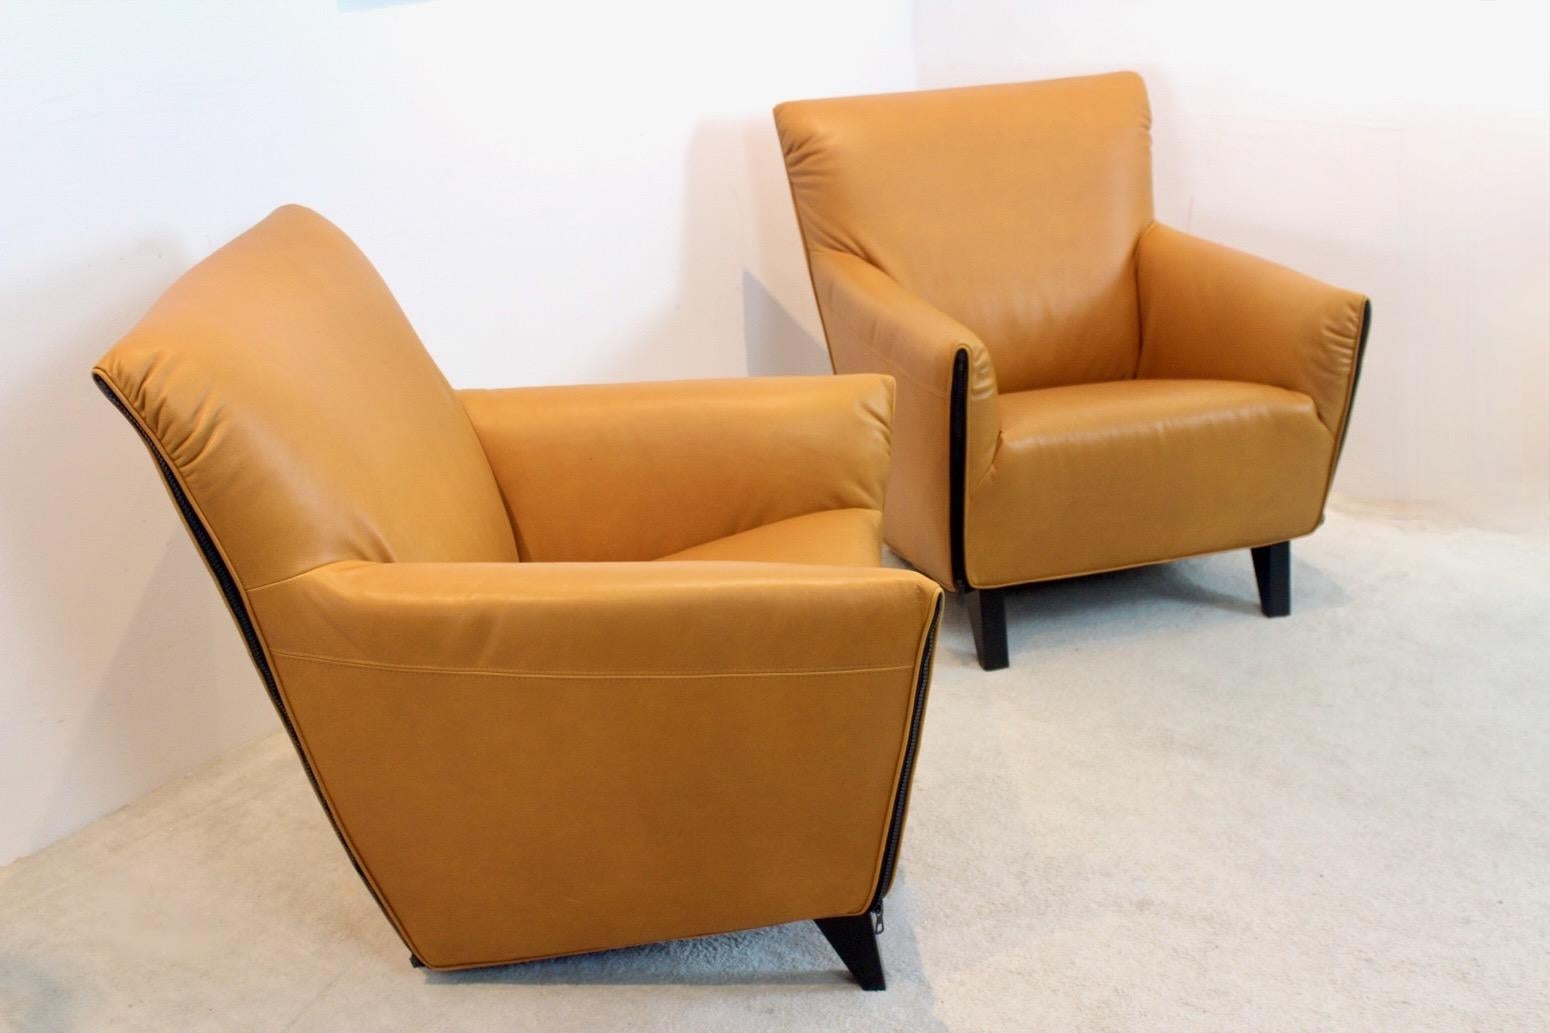 Set of Iconic Artifort F330 ‘Cordoba’ Lounge Chairs in Soft Ochre Leather For Sale 9